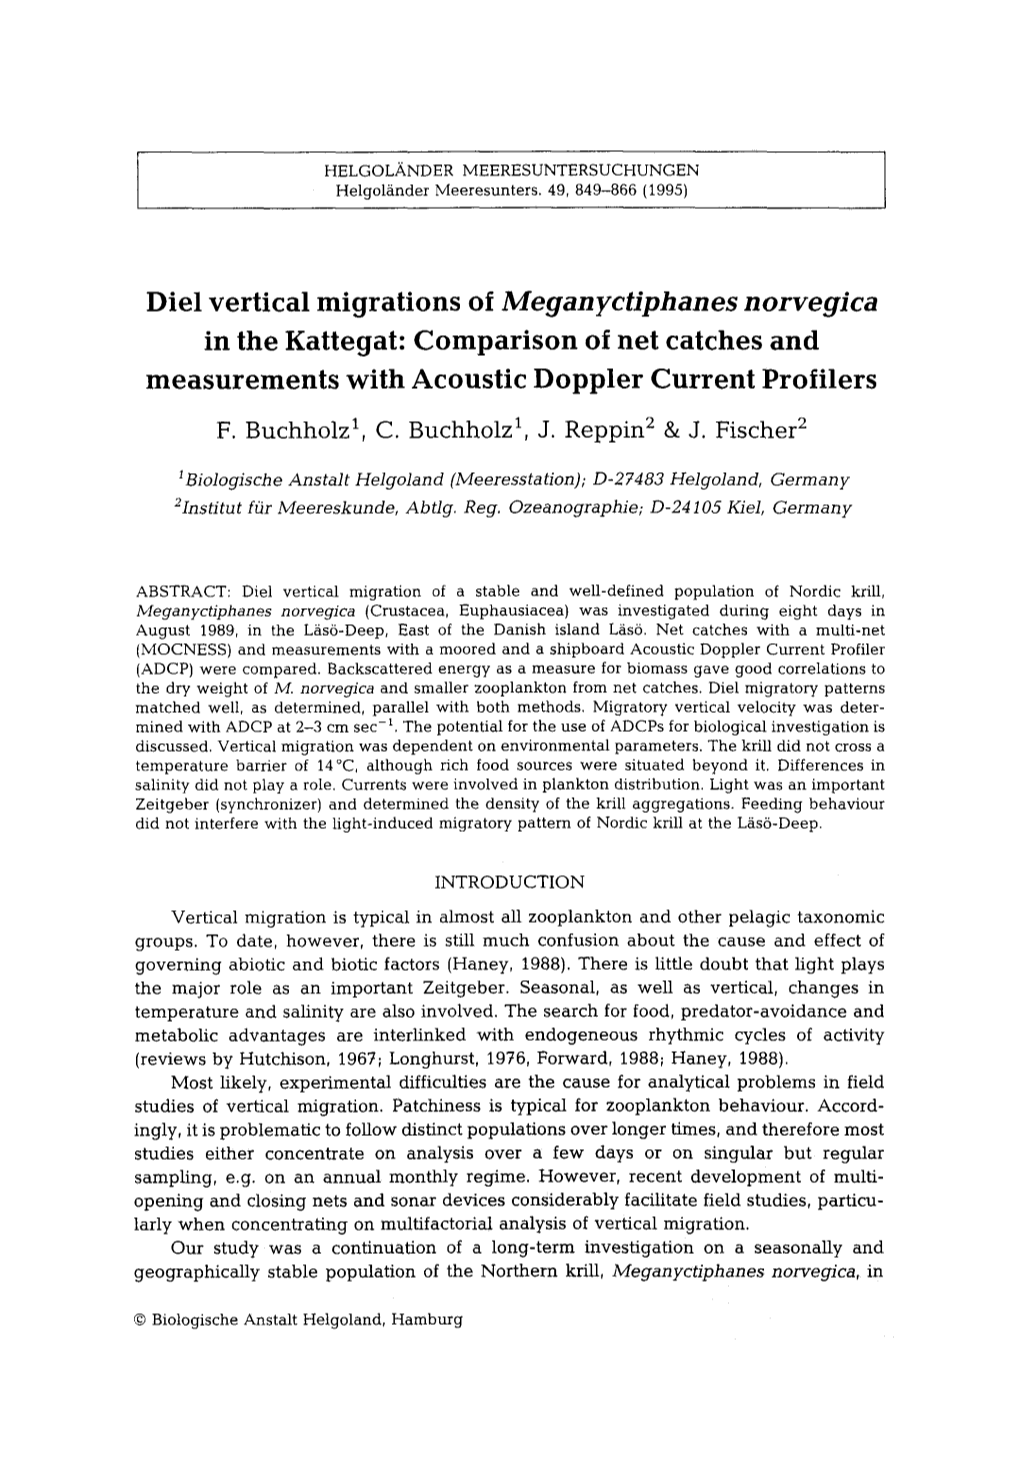 Diel Vertical Migrations of Meganyctiphanes Norvegica in the Kattegat: Comparison of Net Catches and Measurements with Acoustic Doppler Current Profilers